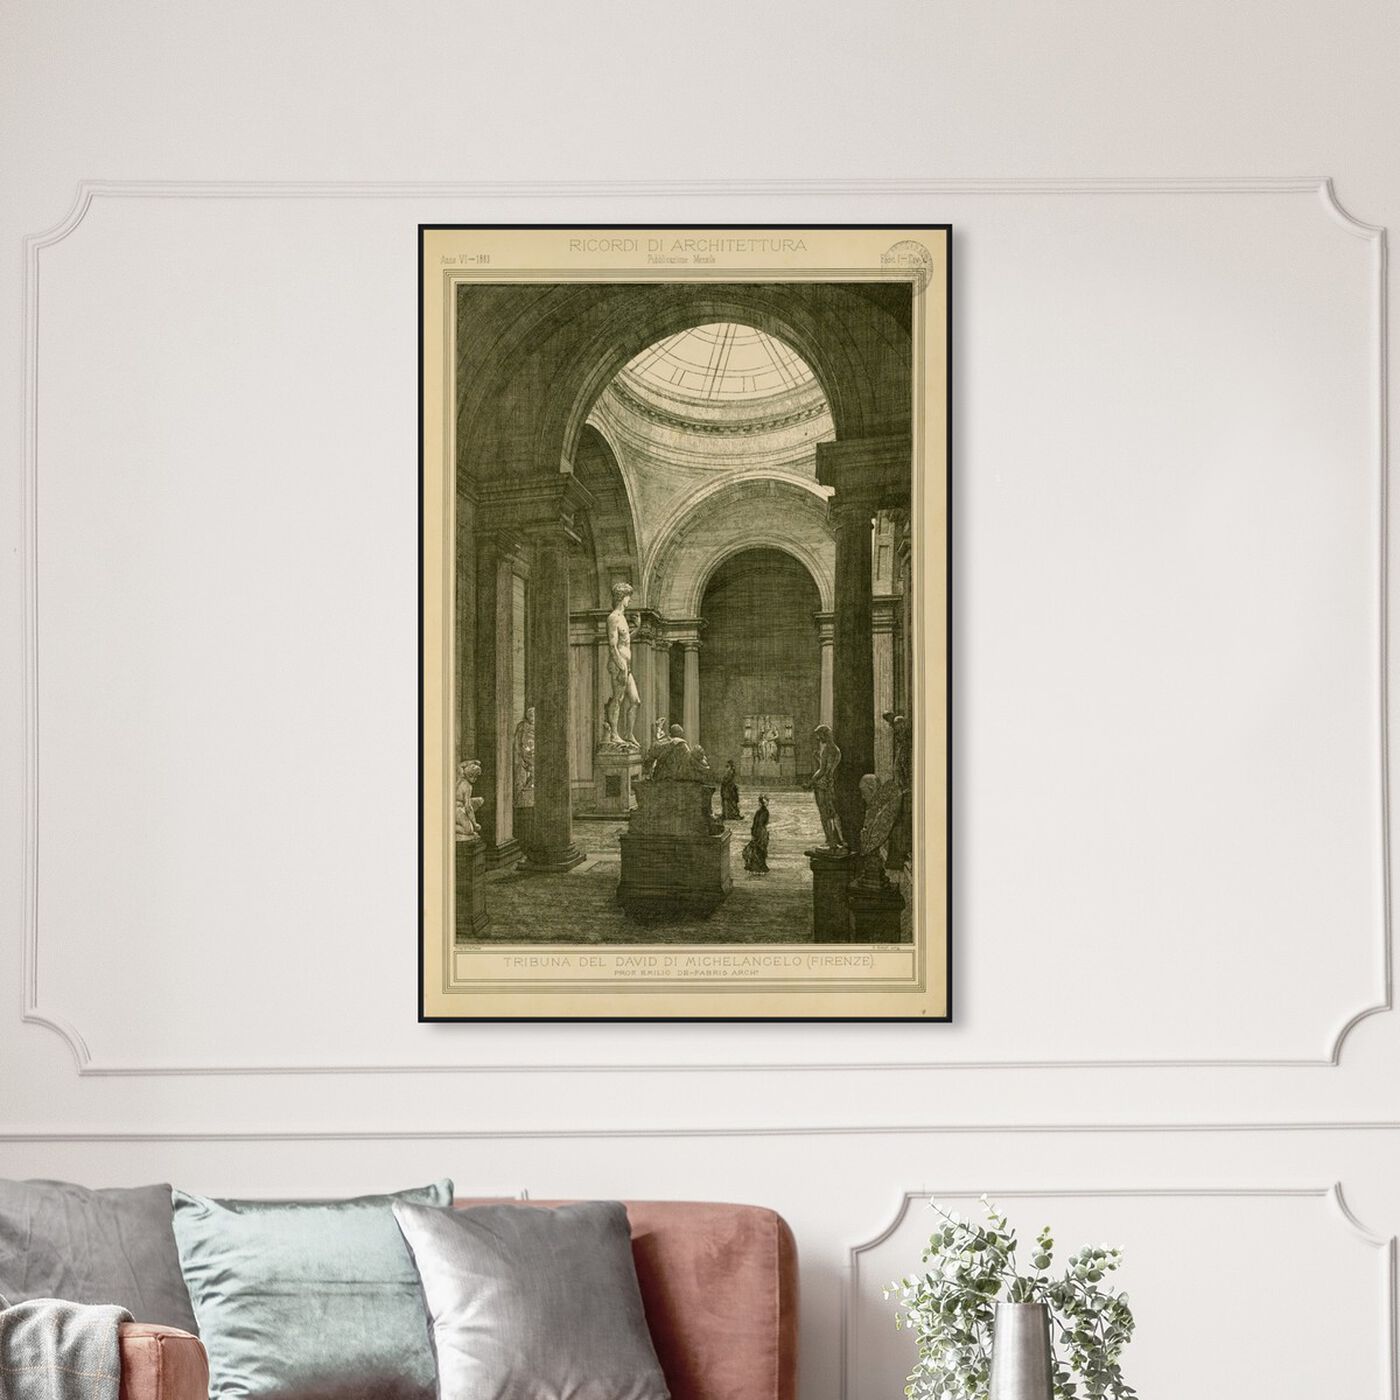 Hanging view of Tribuna del David di Michelancelo - The Art Cabinet featuring architecture and buildings and structures art.